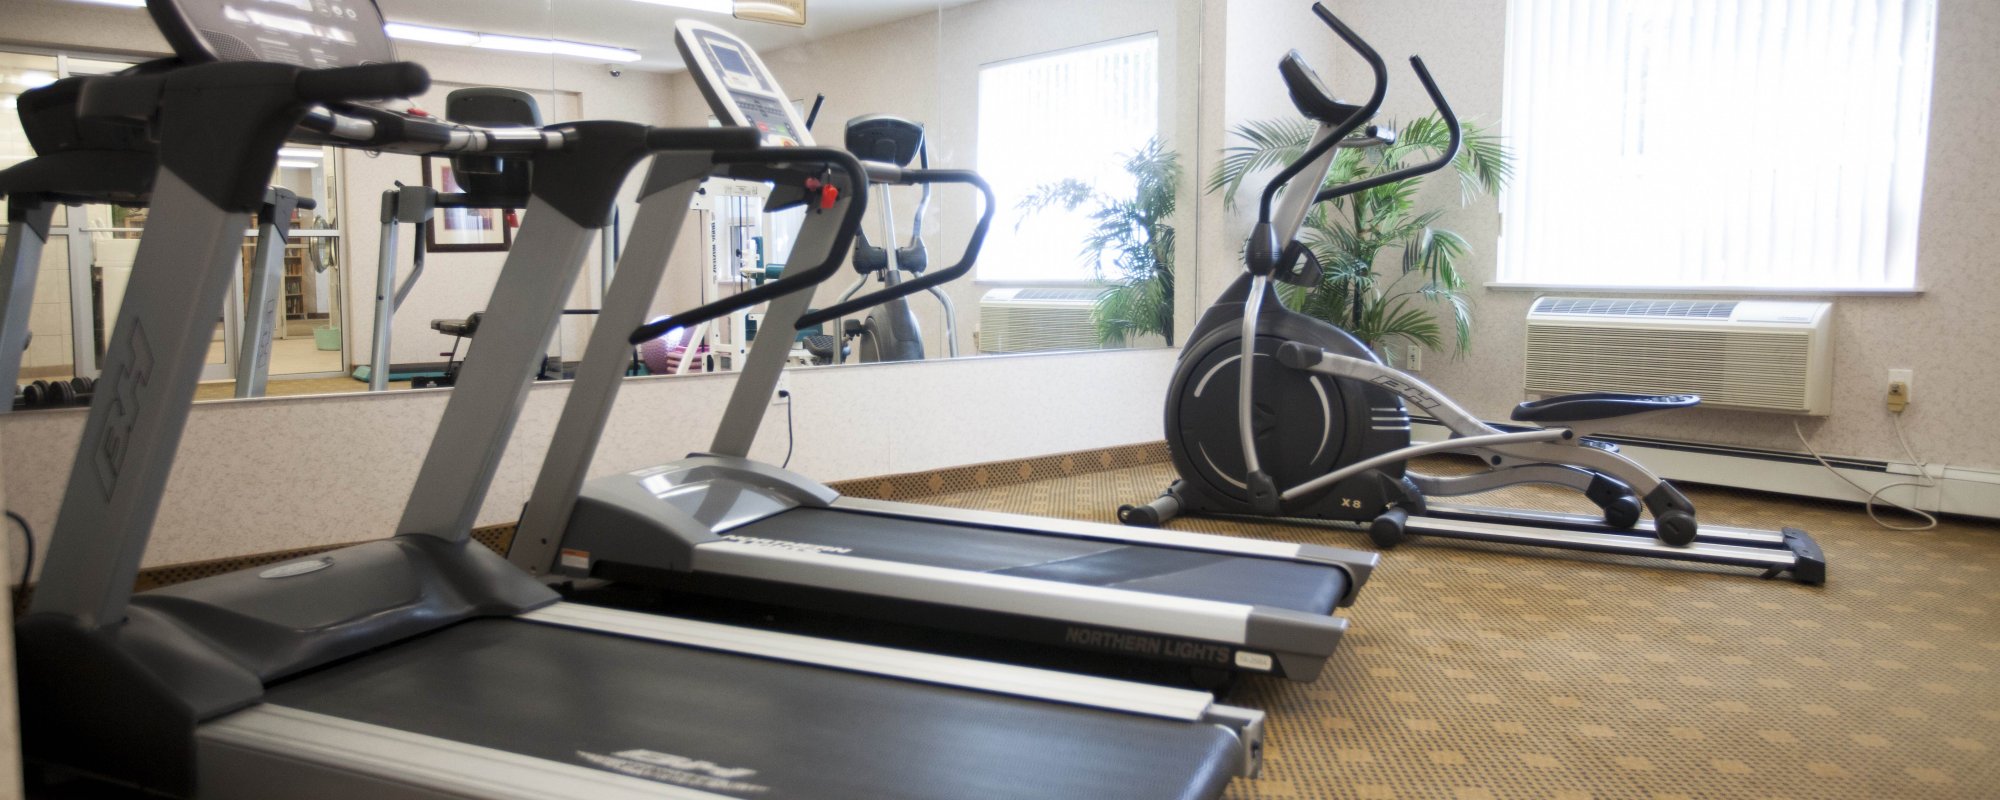 Exercise facilities at 565 Proudfoot apartments